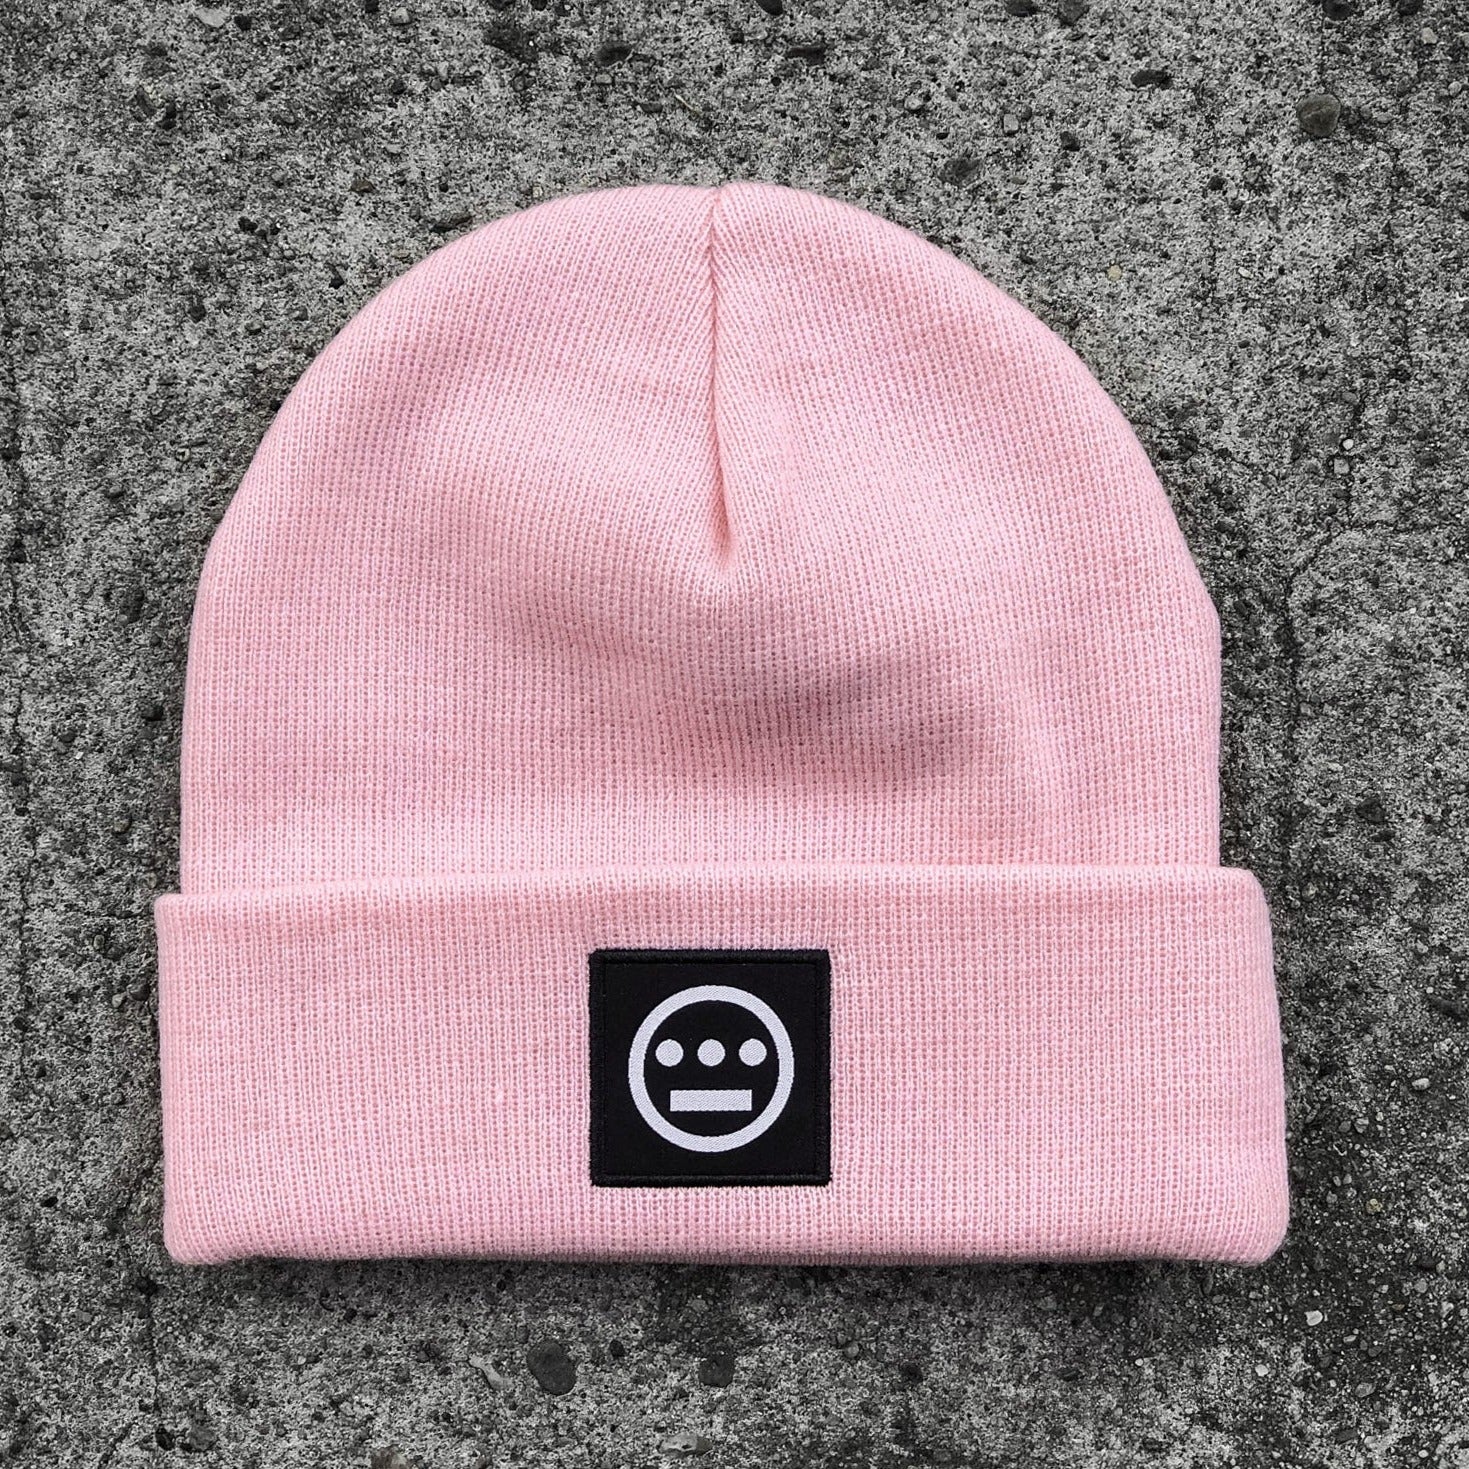 Pink cuffed beanie with black and white hiero hip-hop logo patch on the cuff on asphalt.